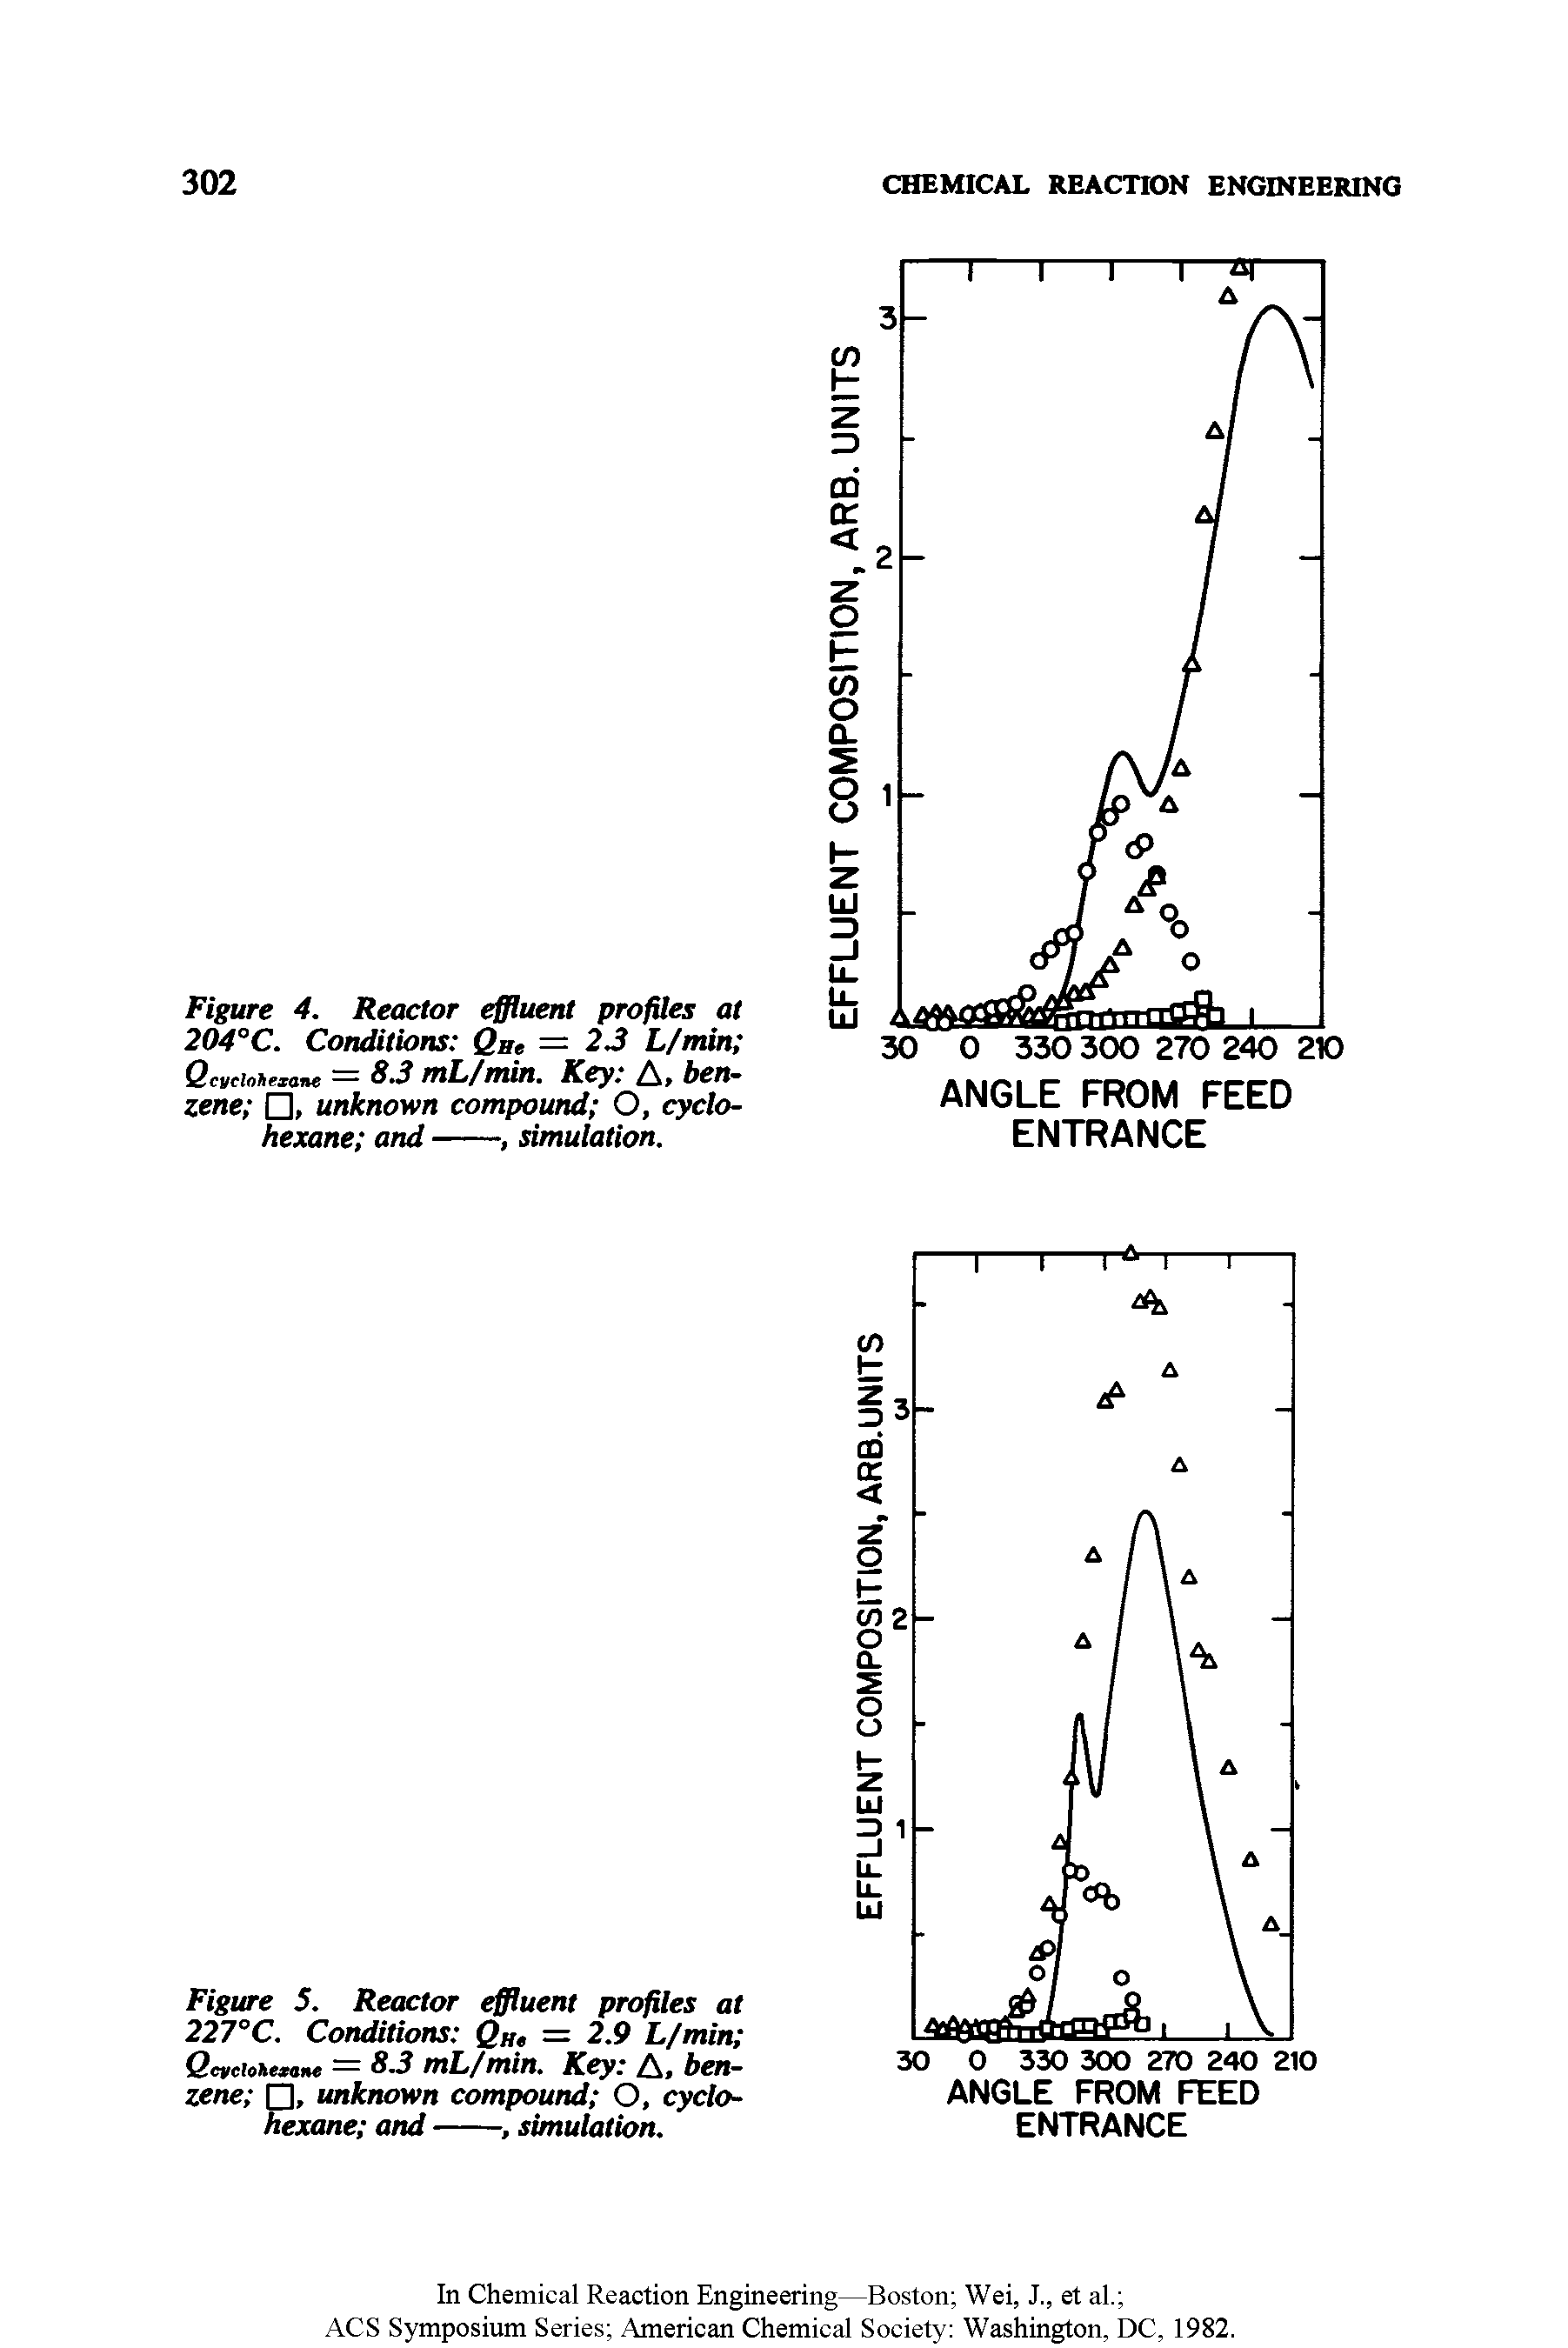 Figure 4. Reactor effluent profiles at 204°C. Conditions Qhe — 23 L/min Qcyciohexane — S3 mL/min. Key. /, benzene , unknown compound O, cyclohexane and-----------------, simulation.